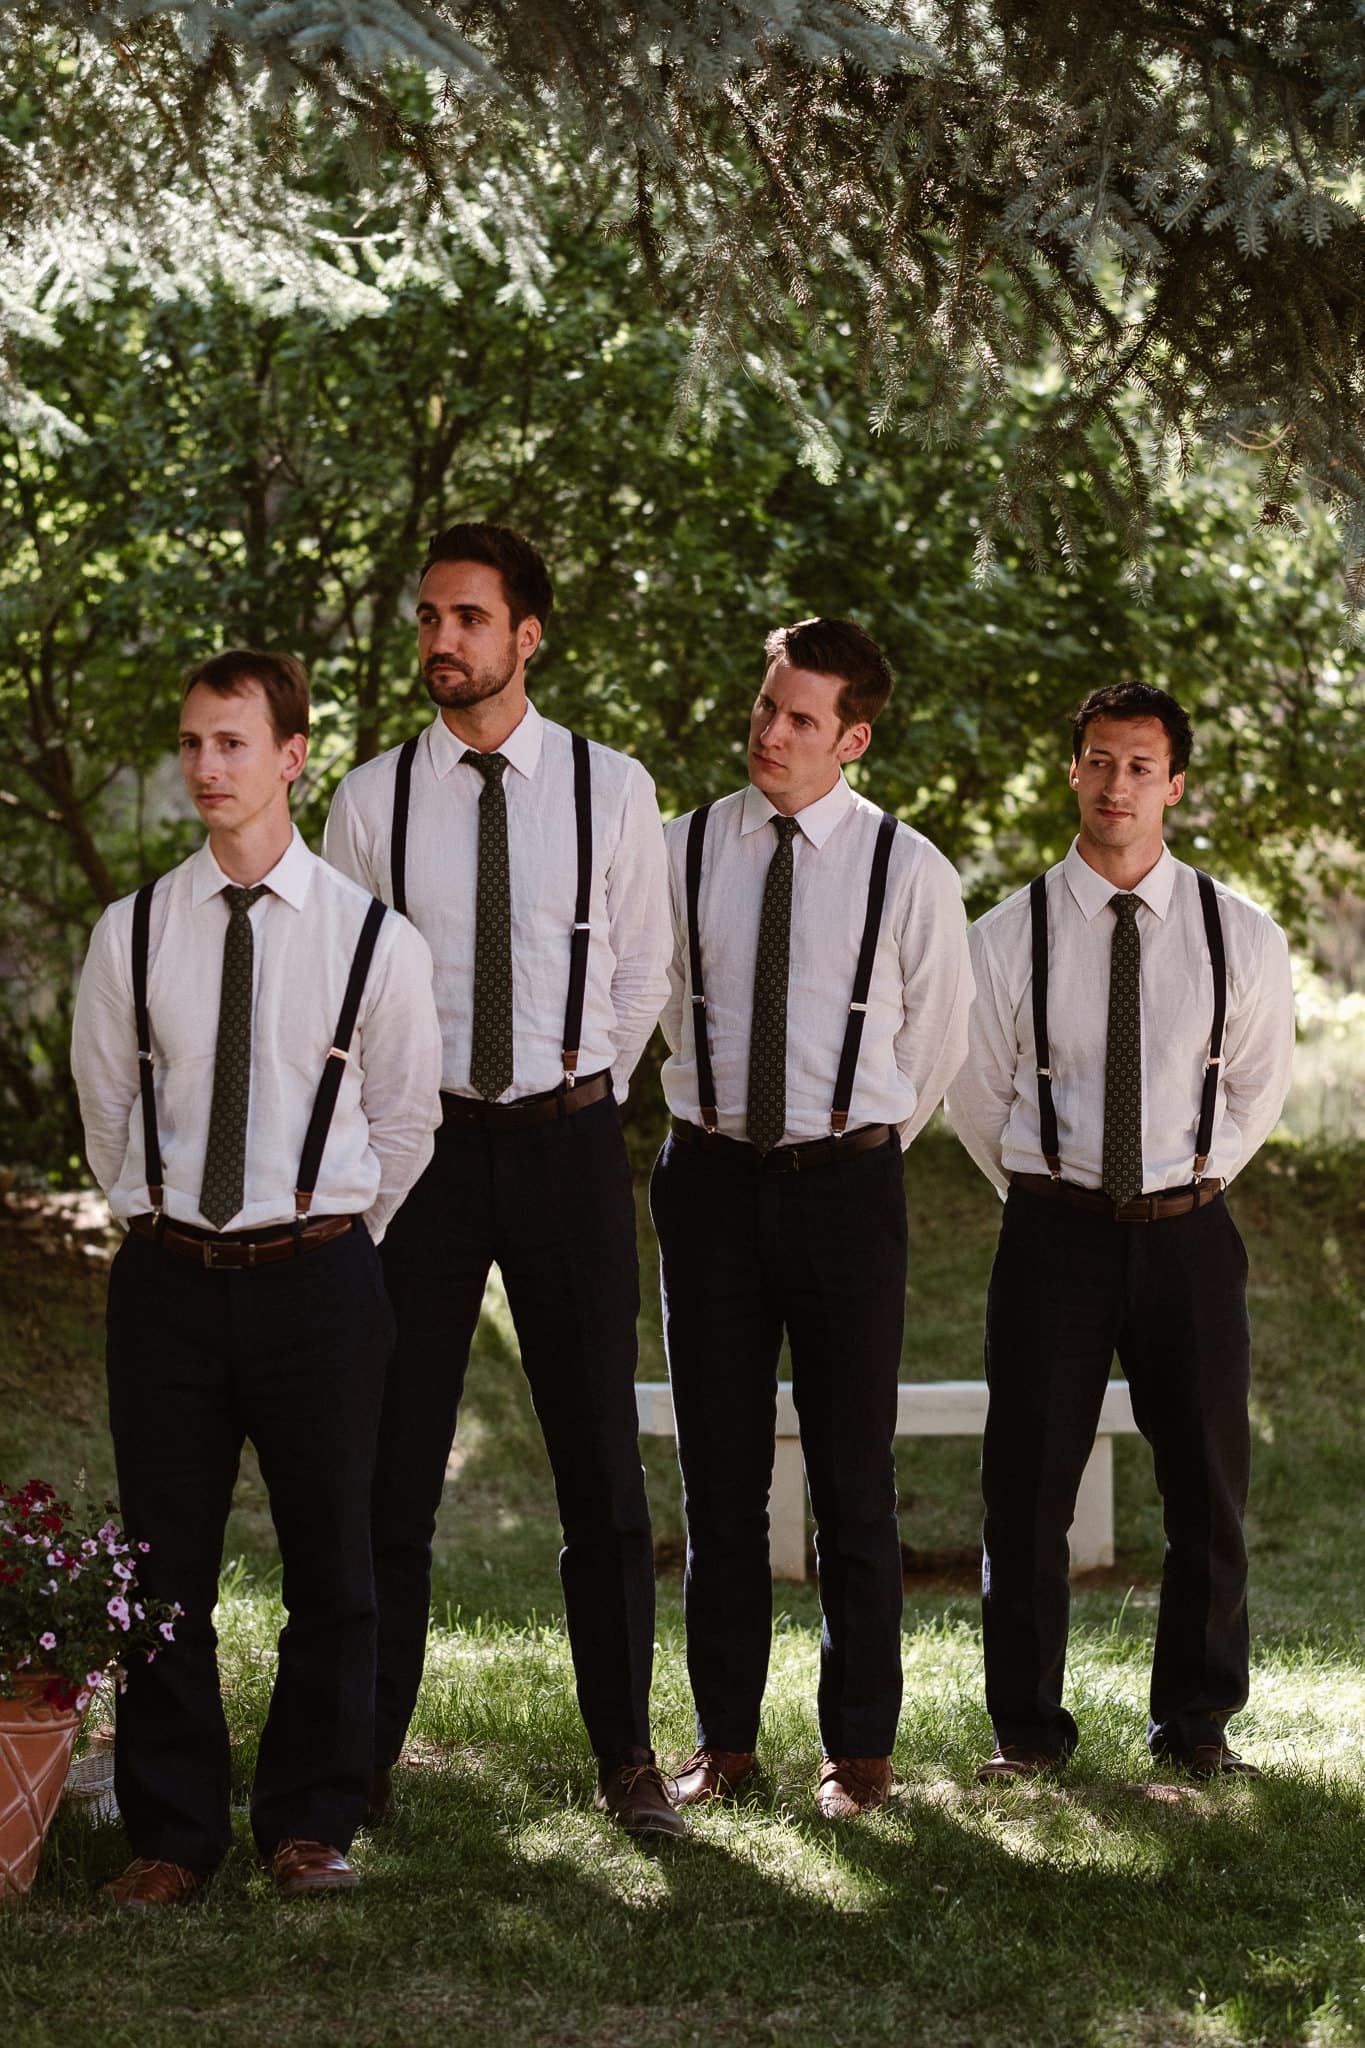 Redstone Inn wedding photographer, Carbondale wedding photographer, Colorado intimate wedding photographer, wedding ceremony, groomsmen in white shirts with black ties and suspenders